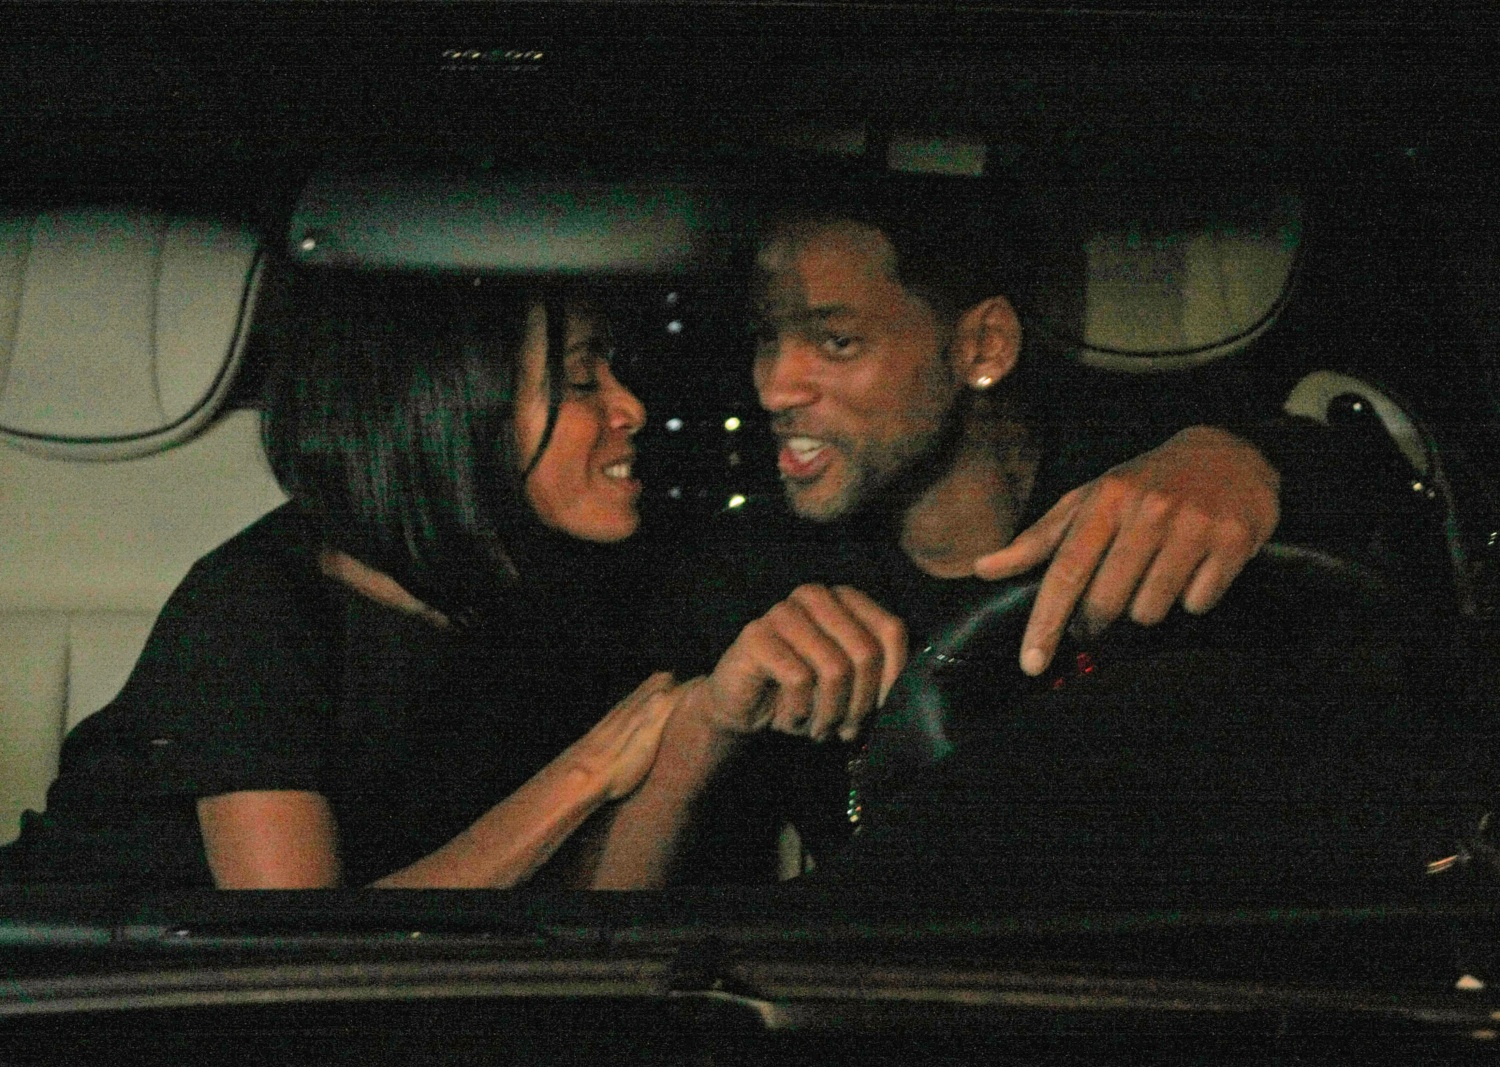  Actor Will Smith and wife actress Jada Pinkett Smith leave the Cut resturant in Beverly Hills after dining with Tom Cruise and Kathie Holmes on February 27, 2008 in Los Angeles California. 